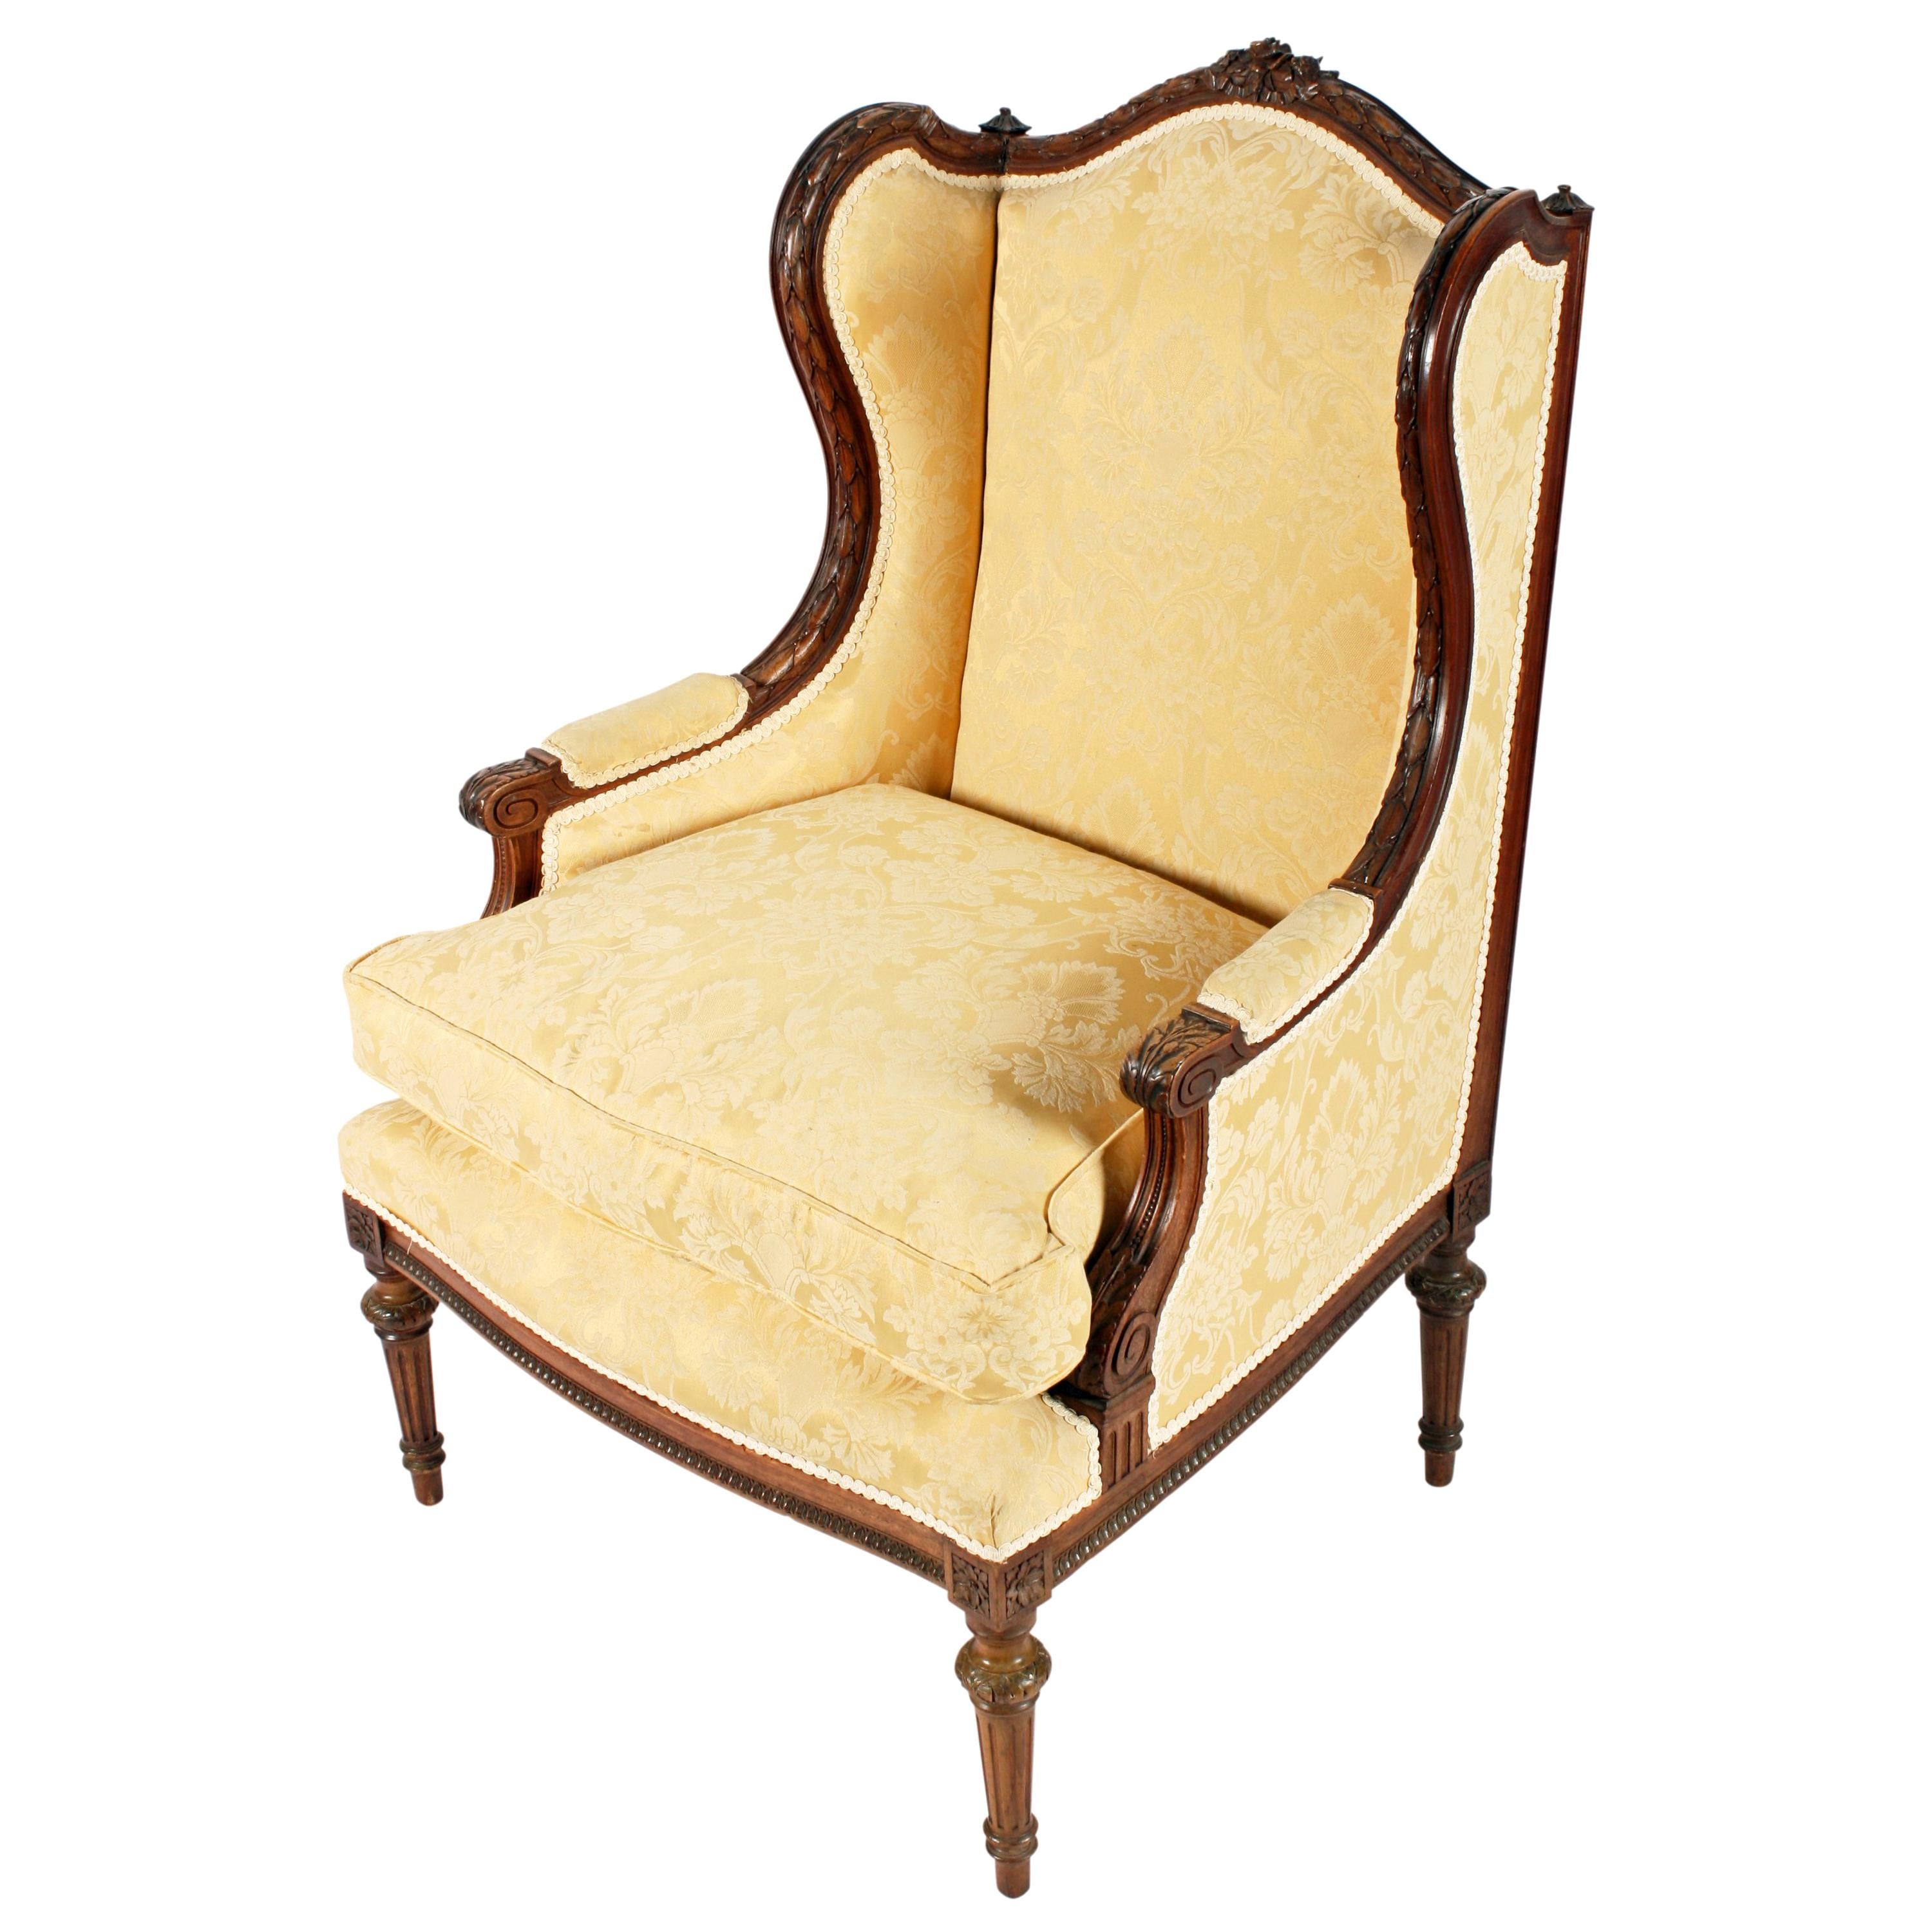 19th Century French Walnut Fauteuil Upholstered Easy chair For Sale